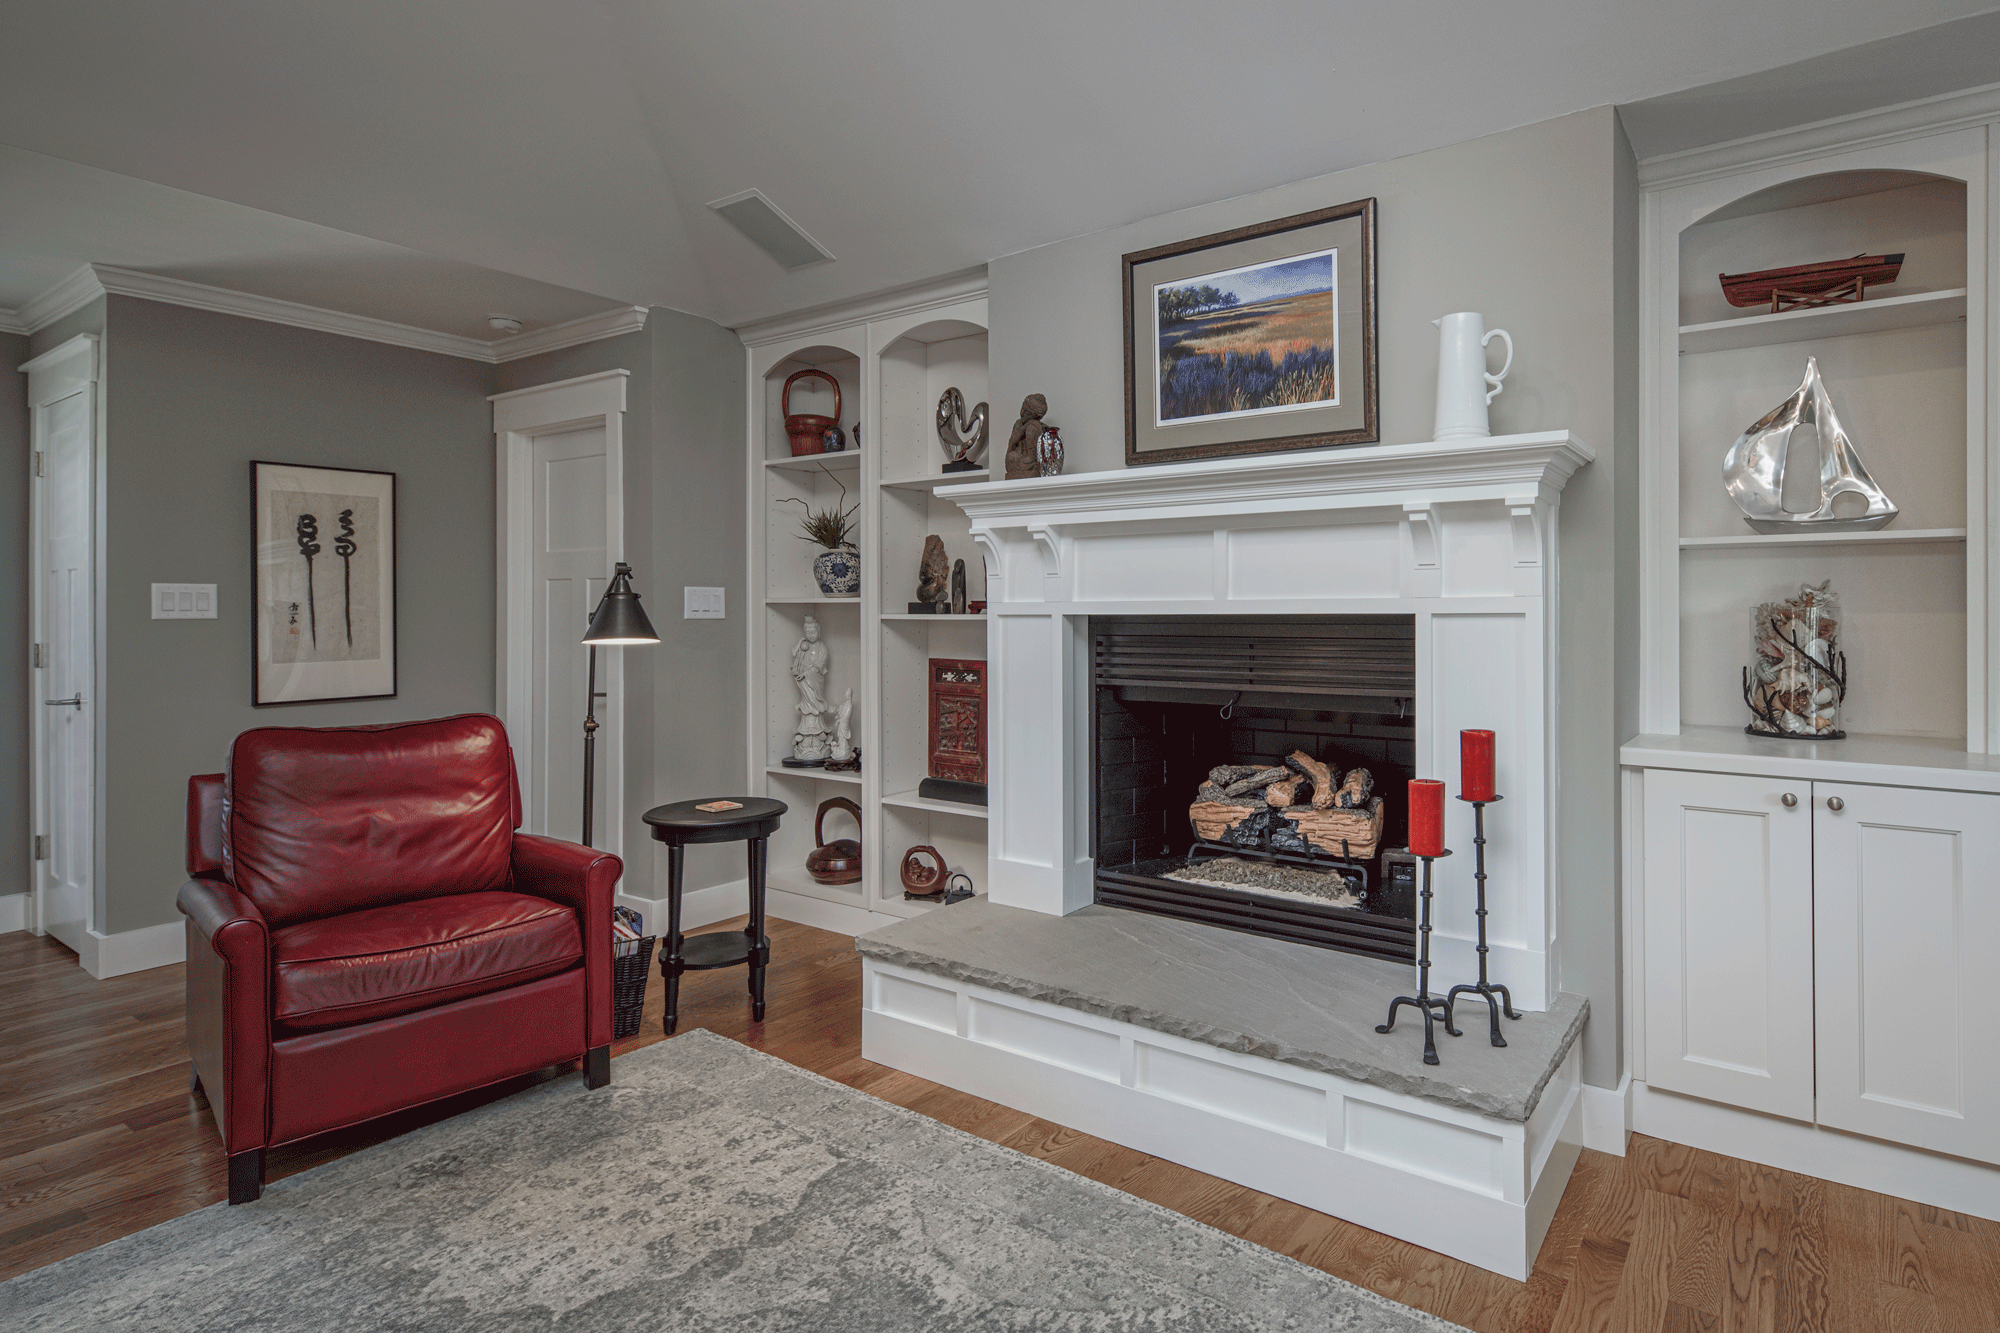 living room design with fireplace, built in shelves, seating, decor